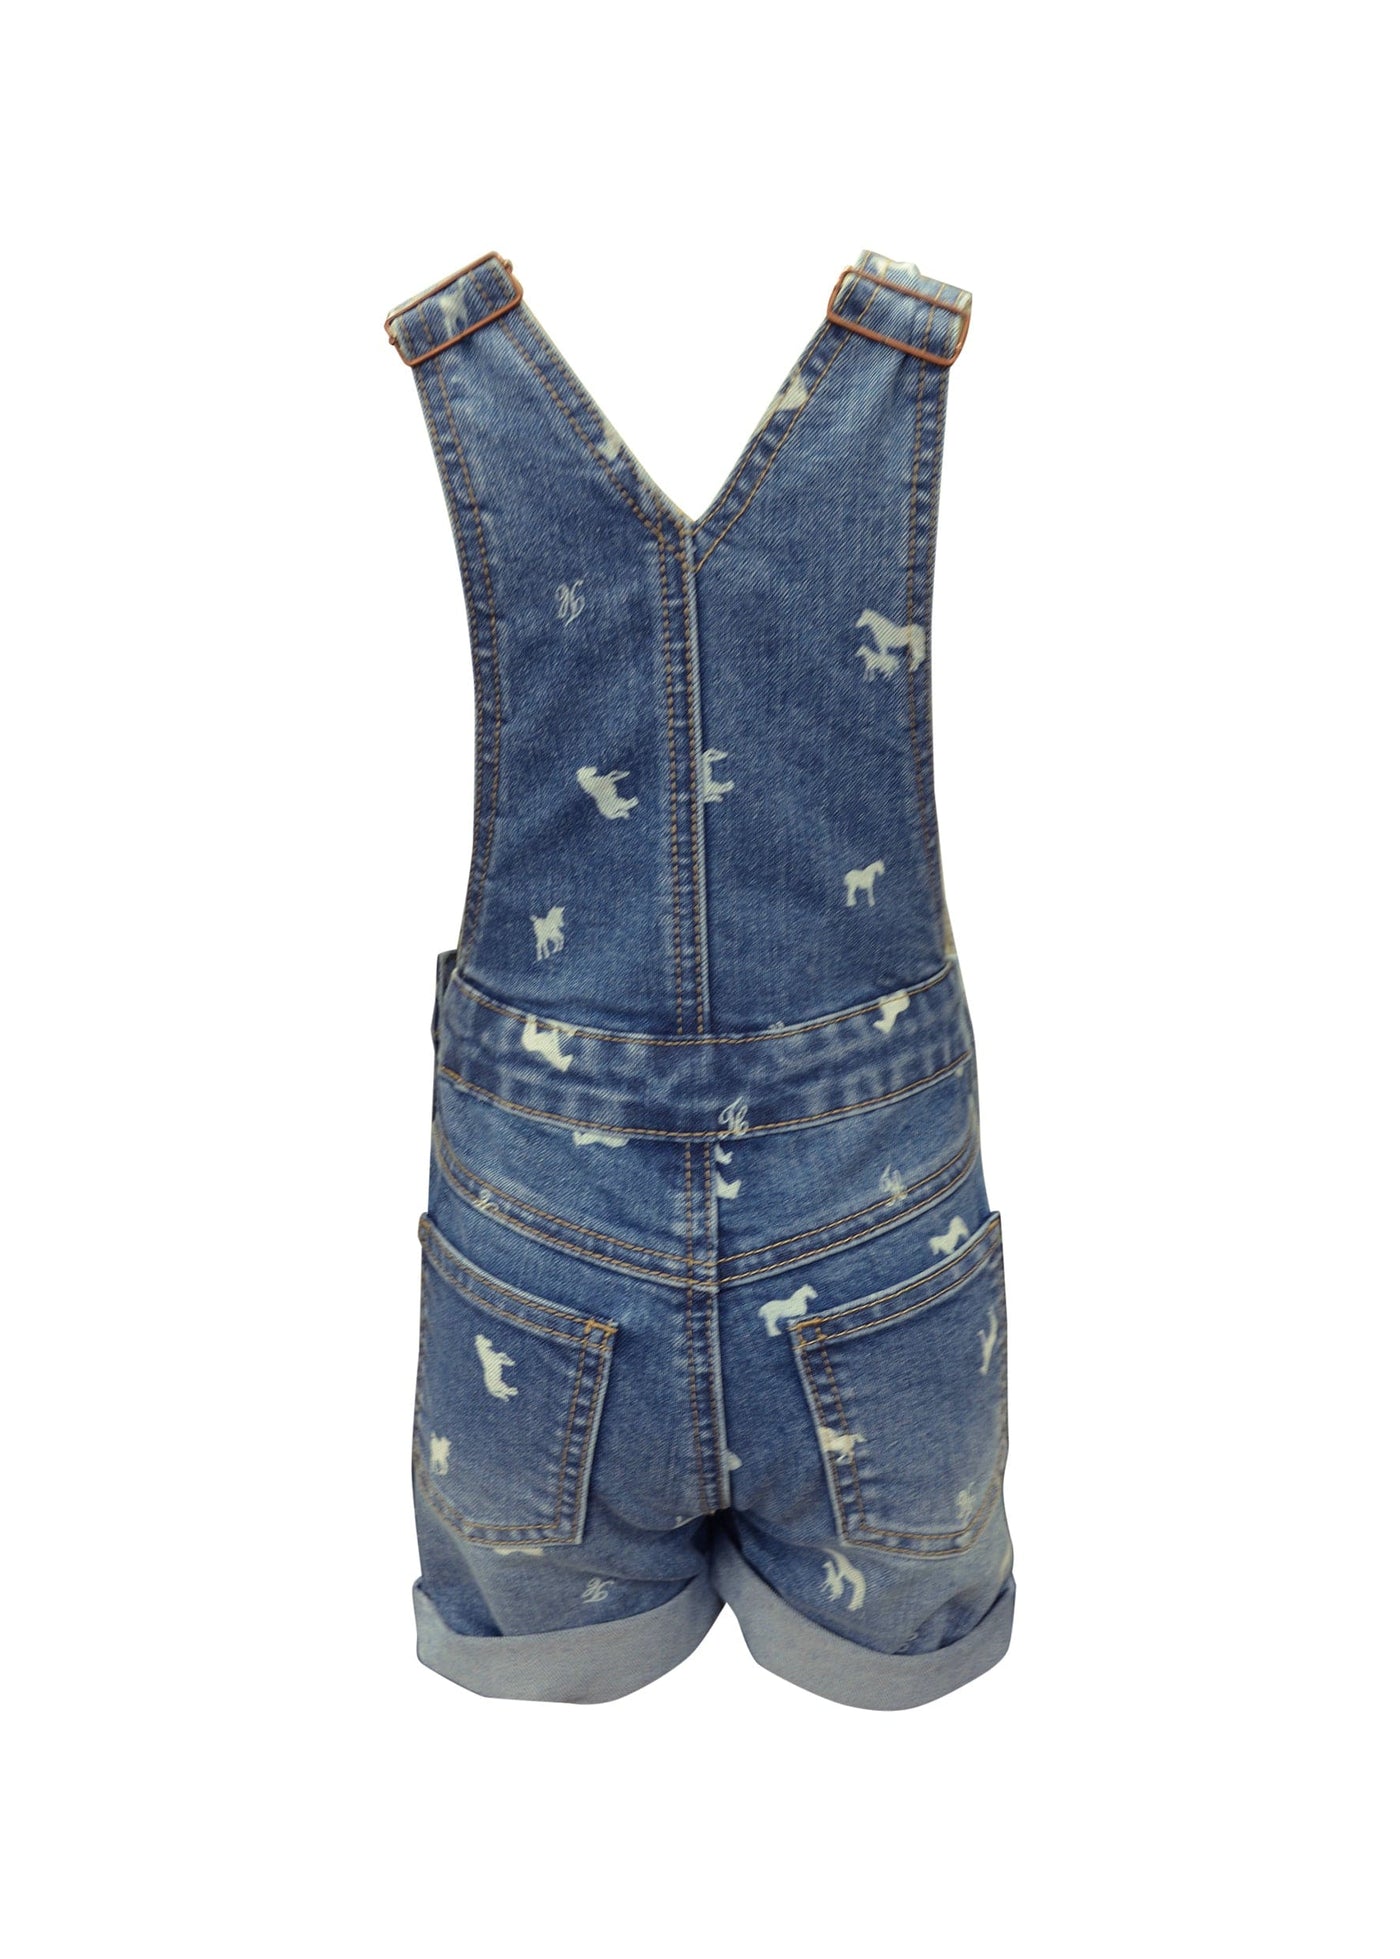 THOMAS COOK BOOTS AND CLOTHING OVERALLS T1S5303072 Girls Dungaree | Horse